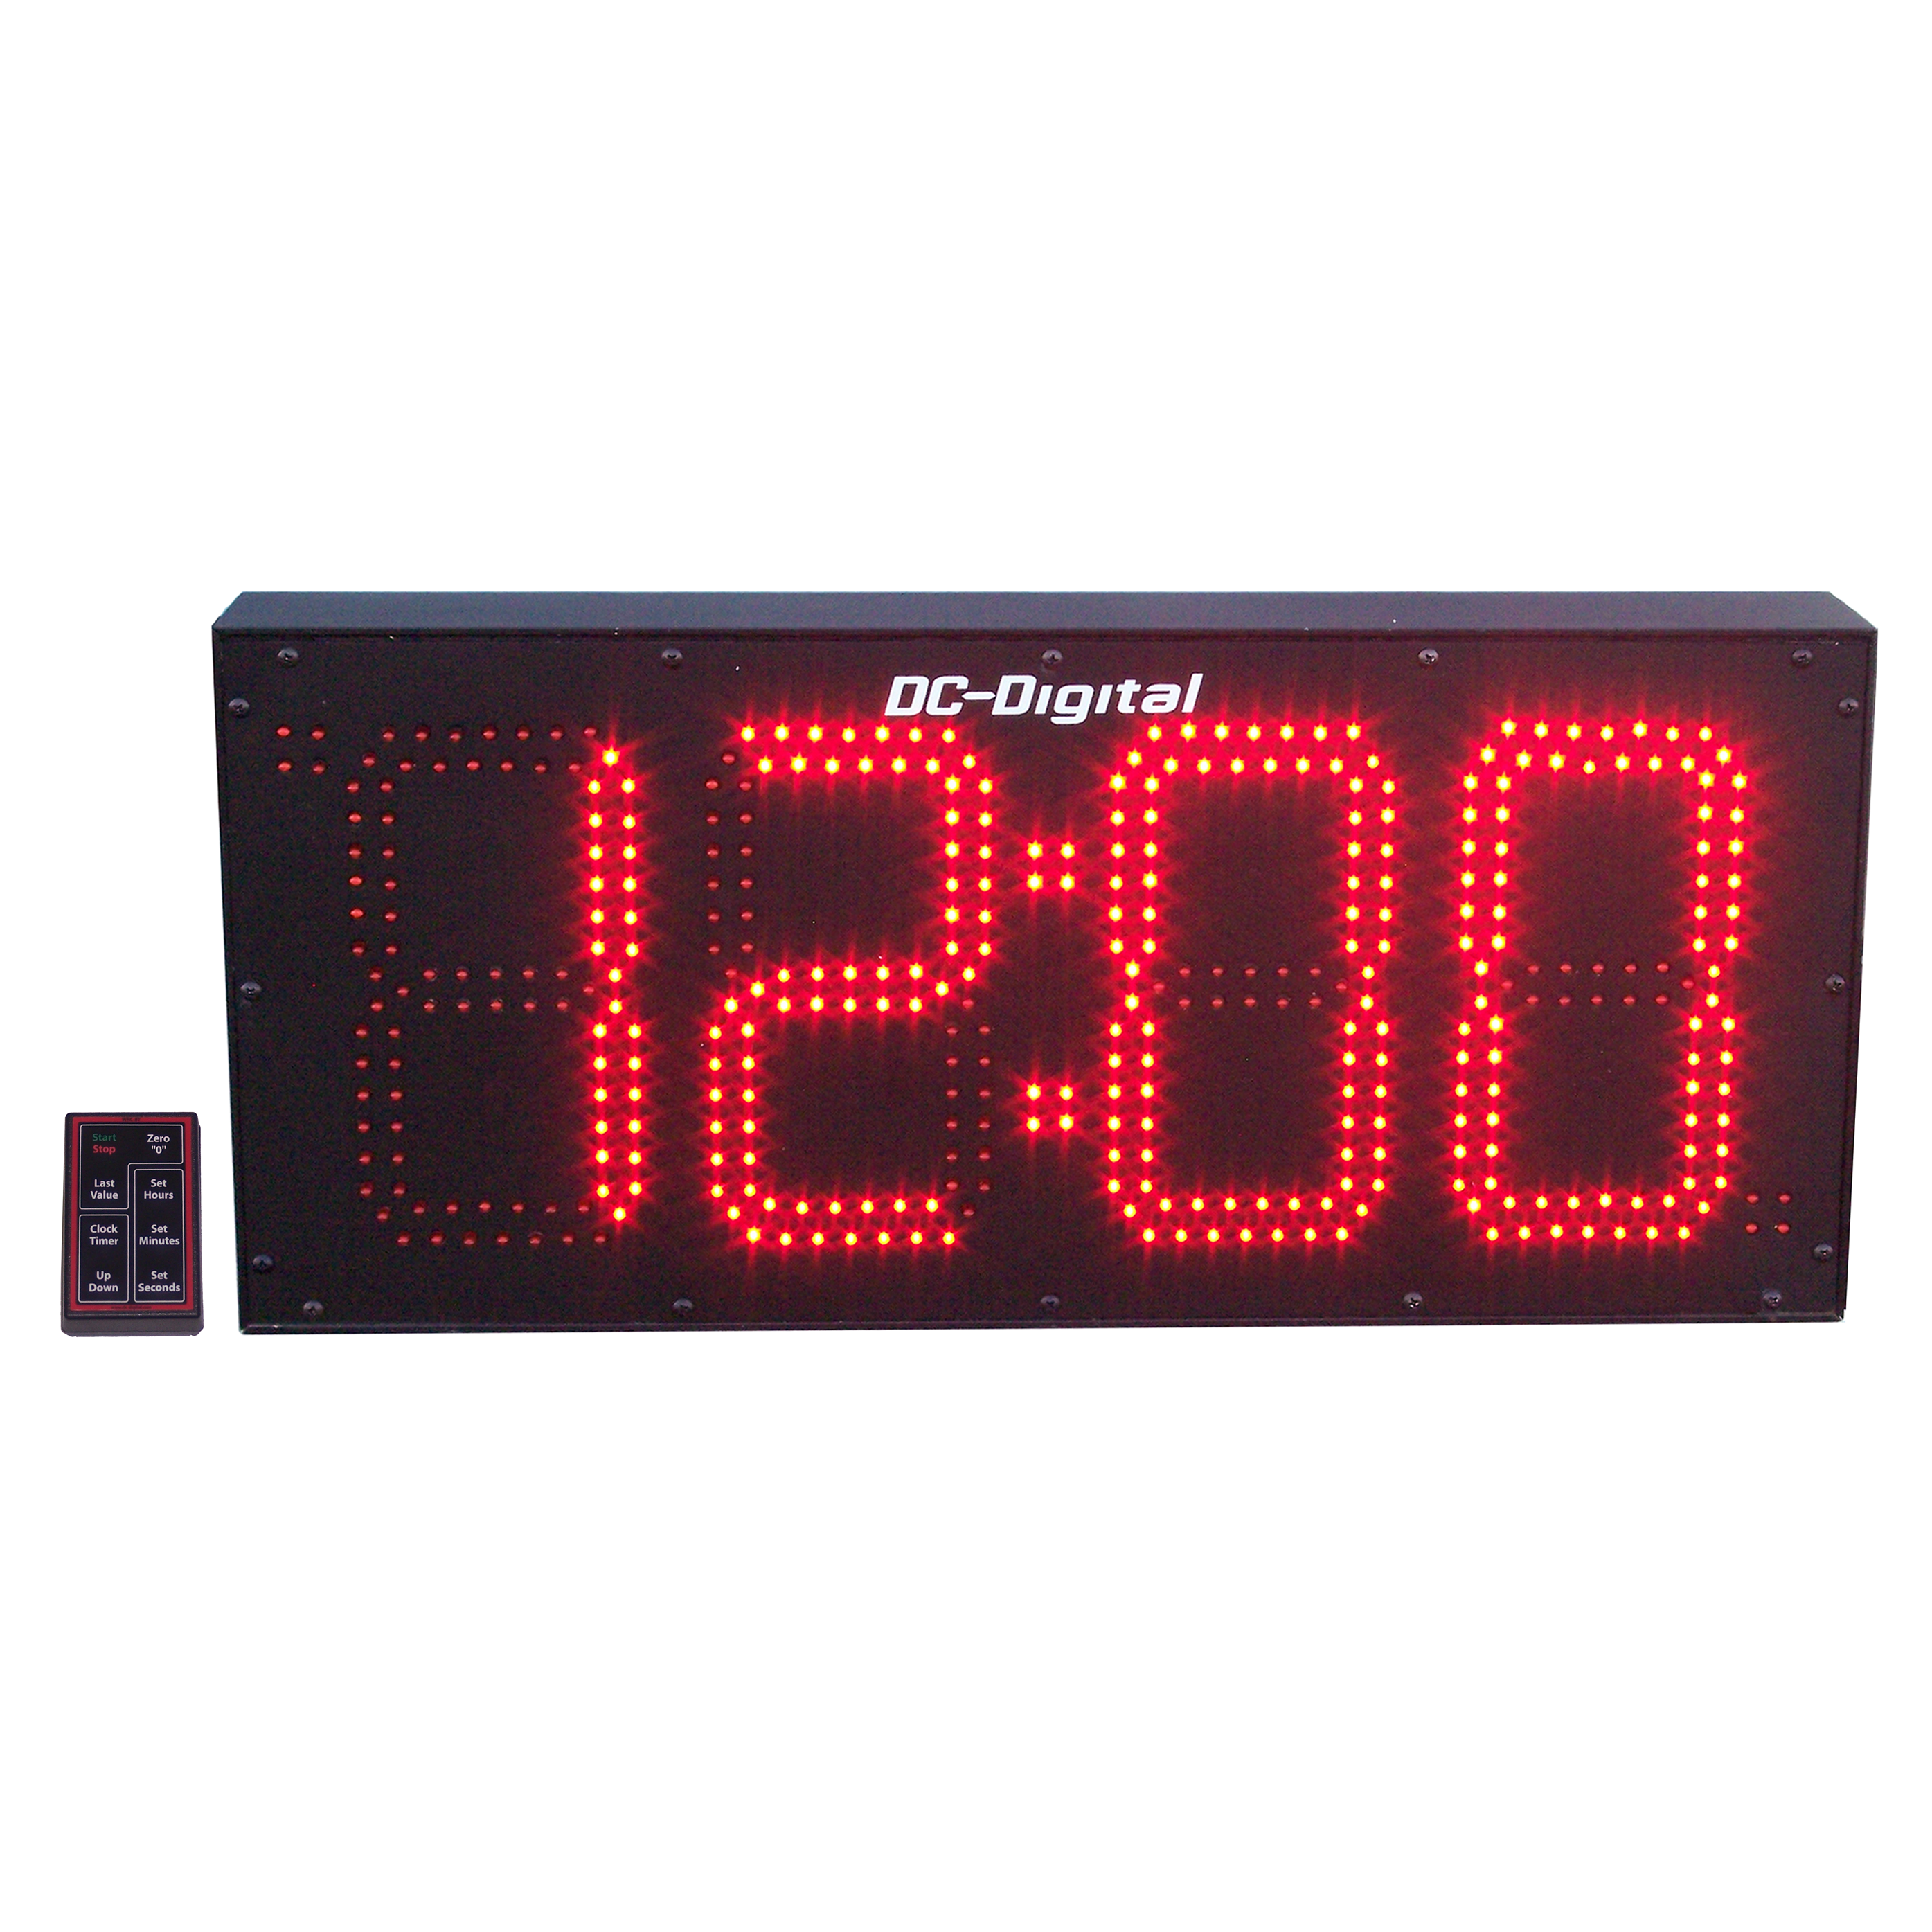 (DC-80UTW-IN) 8.0 Inch LED Digital, Wireless Handheld Controlled, Count Up timer, Countdown Timer, Time of Day Clock (INDOOR)